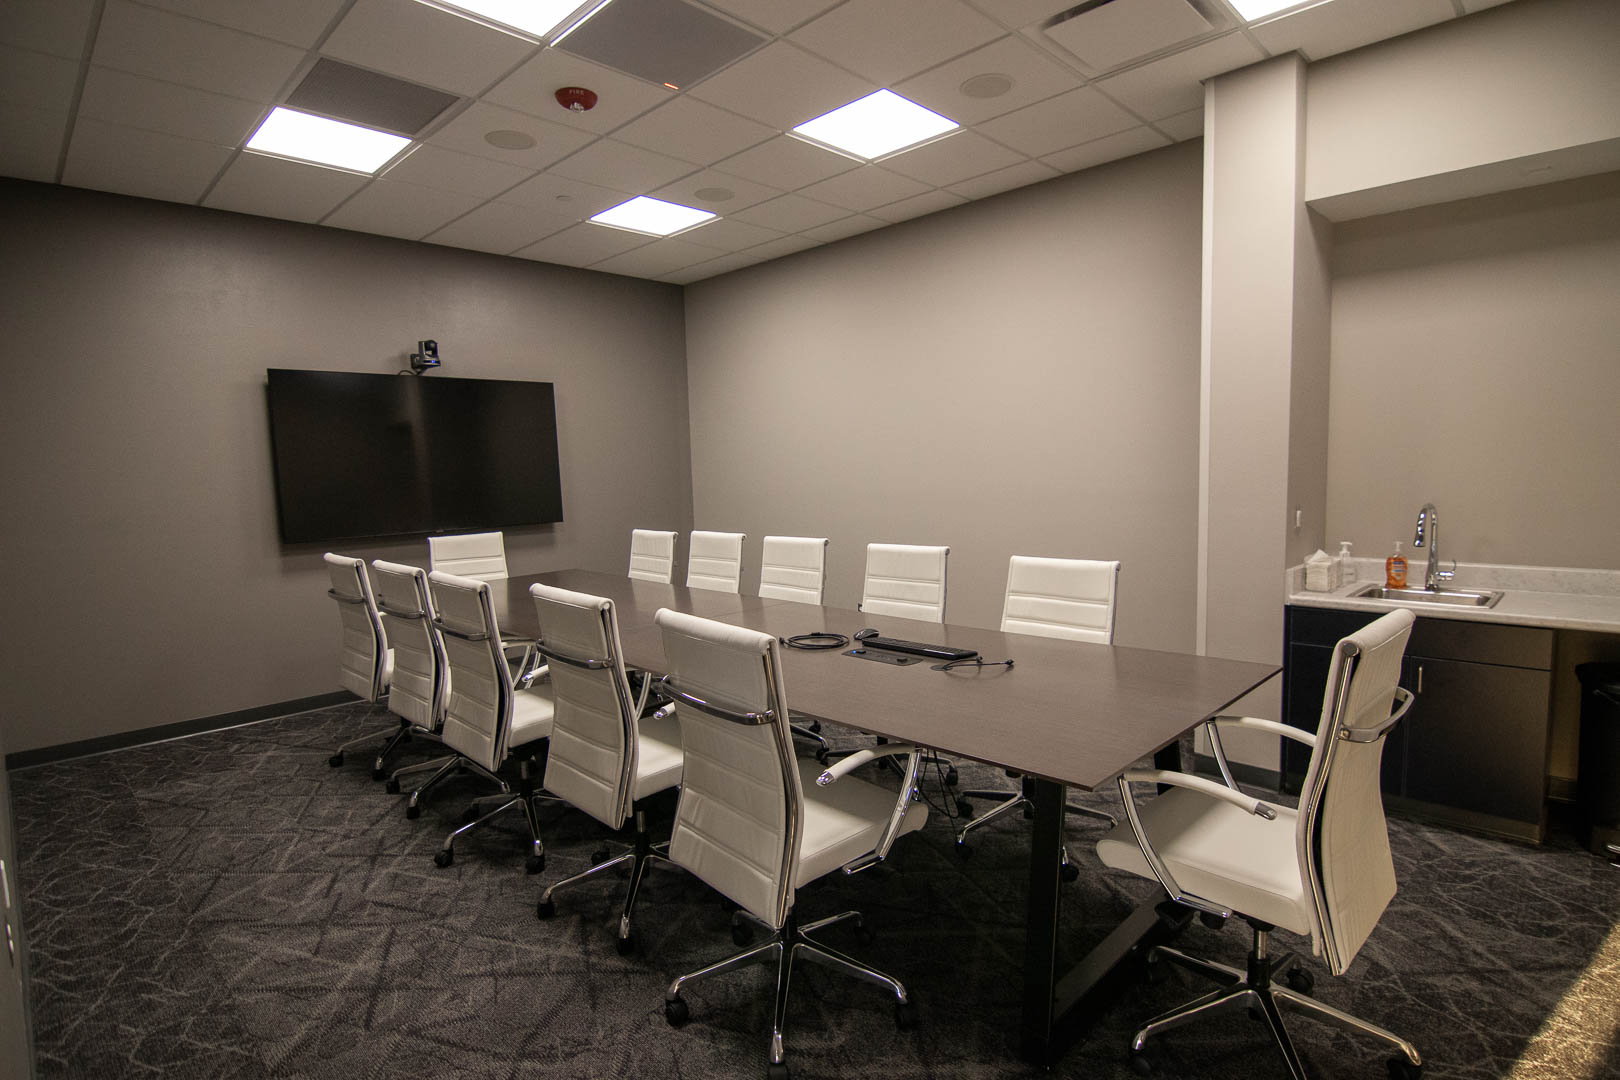 A conference room connected to the larger event space. 10 white office chairs surround a conference table with a large flat panel display at one end. A conferencing camera sits above the TV. A microphone is cleverly disguised as a ceiling tile but the LED mute is a dead giveaway.